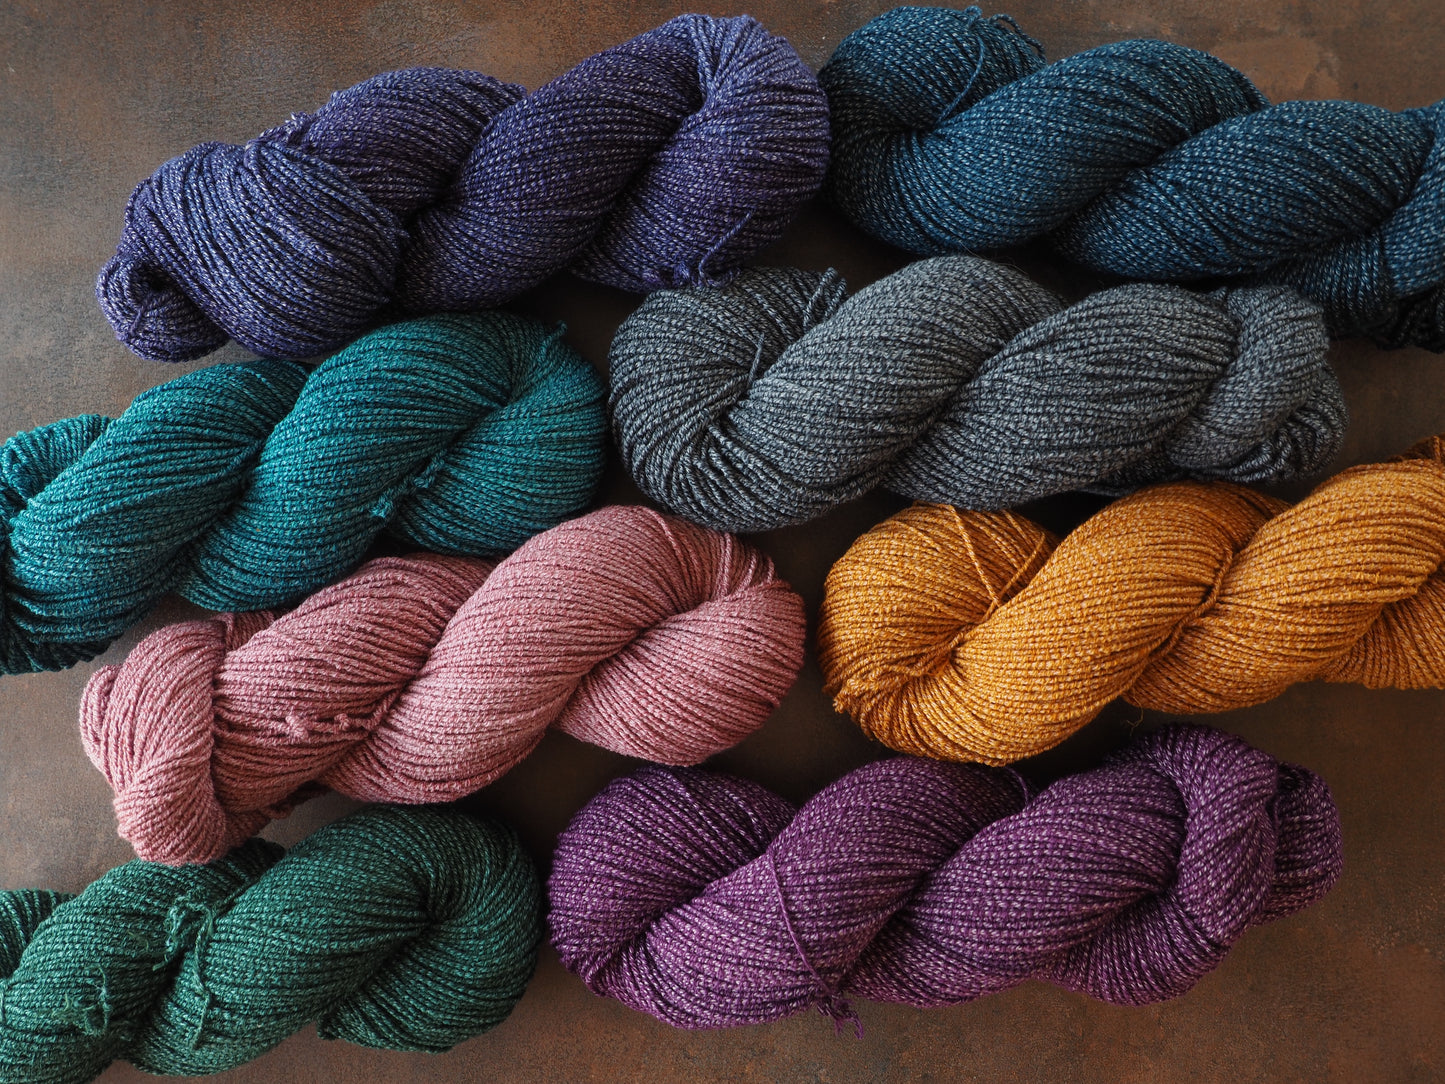 Dark & Stormy Full Set - dyed to order please allow 2-3 weeks for dyeing